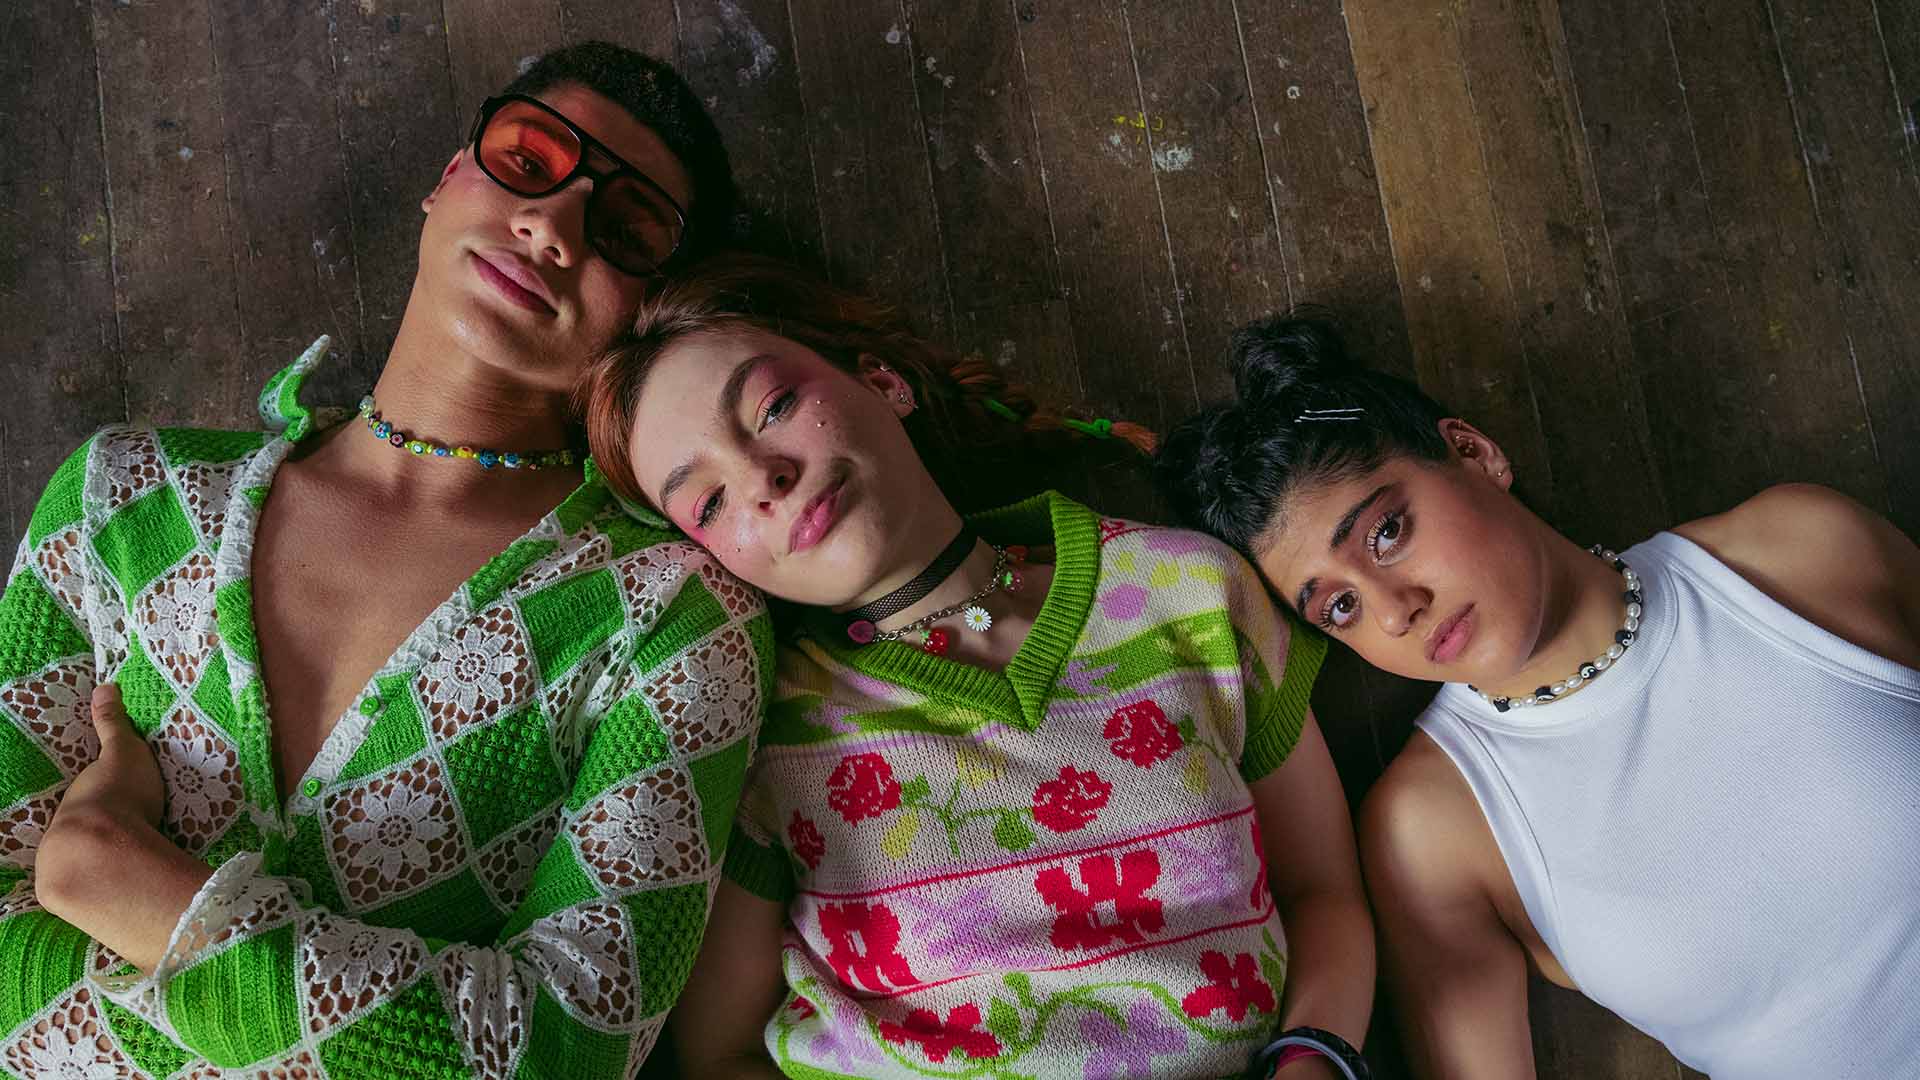 Hartley High Is Back and As Chaotic As Ever in the Trailer for Netflix's 'Heartbreak High' Revival